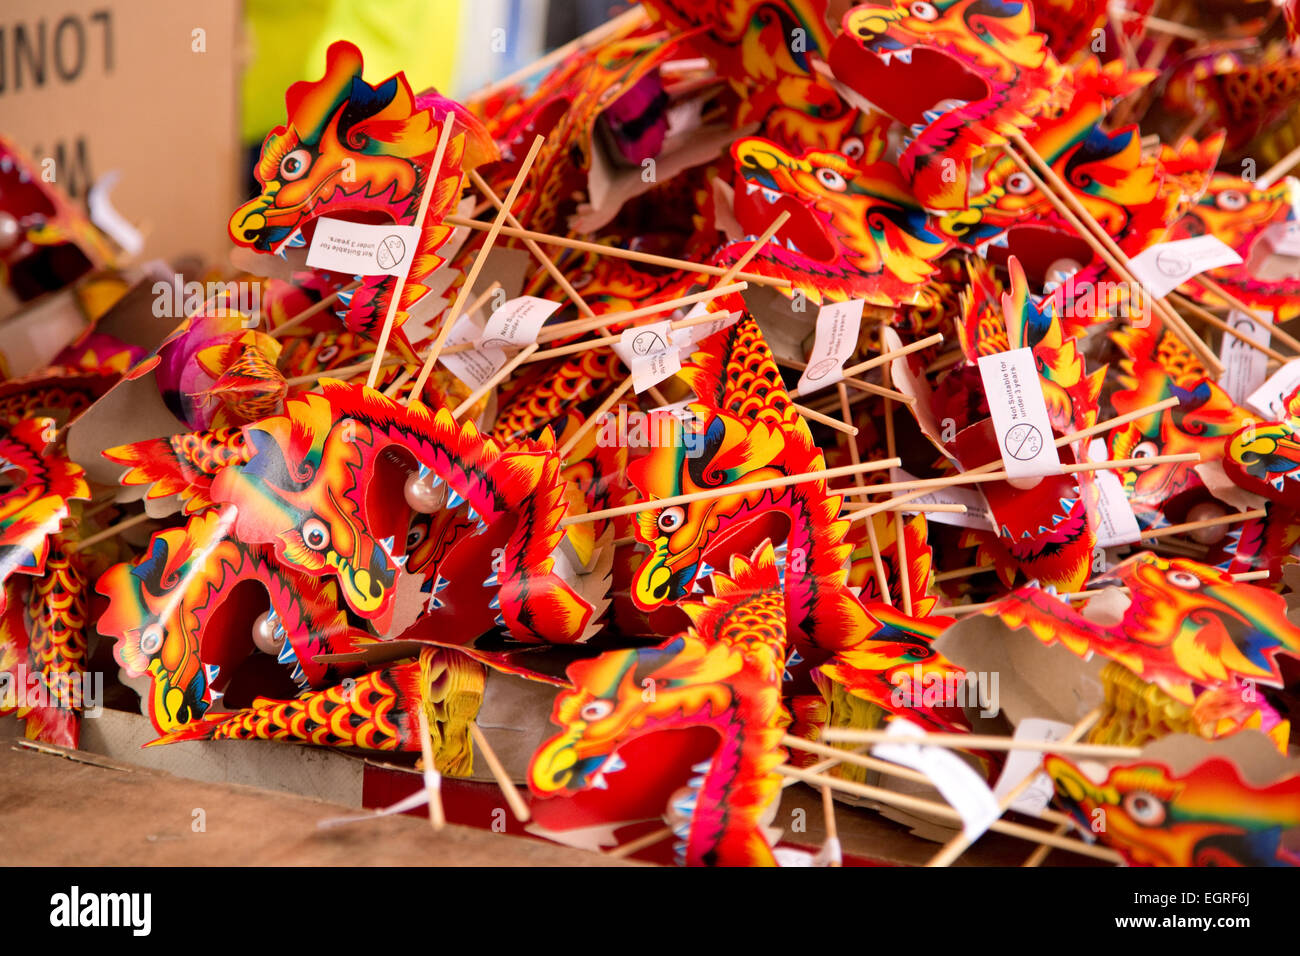 LONDON - FEBRUARY 22nd: Symbolic toy dragons at the Chinese new year celebrations on February the 22nd, 2015, in London, England Stock Photo